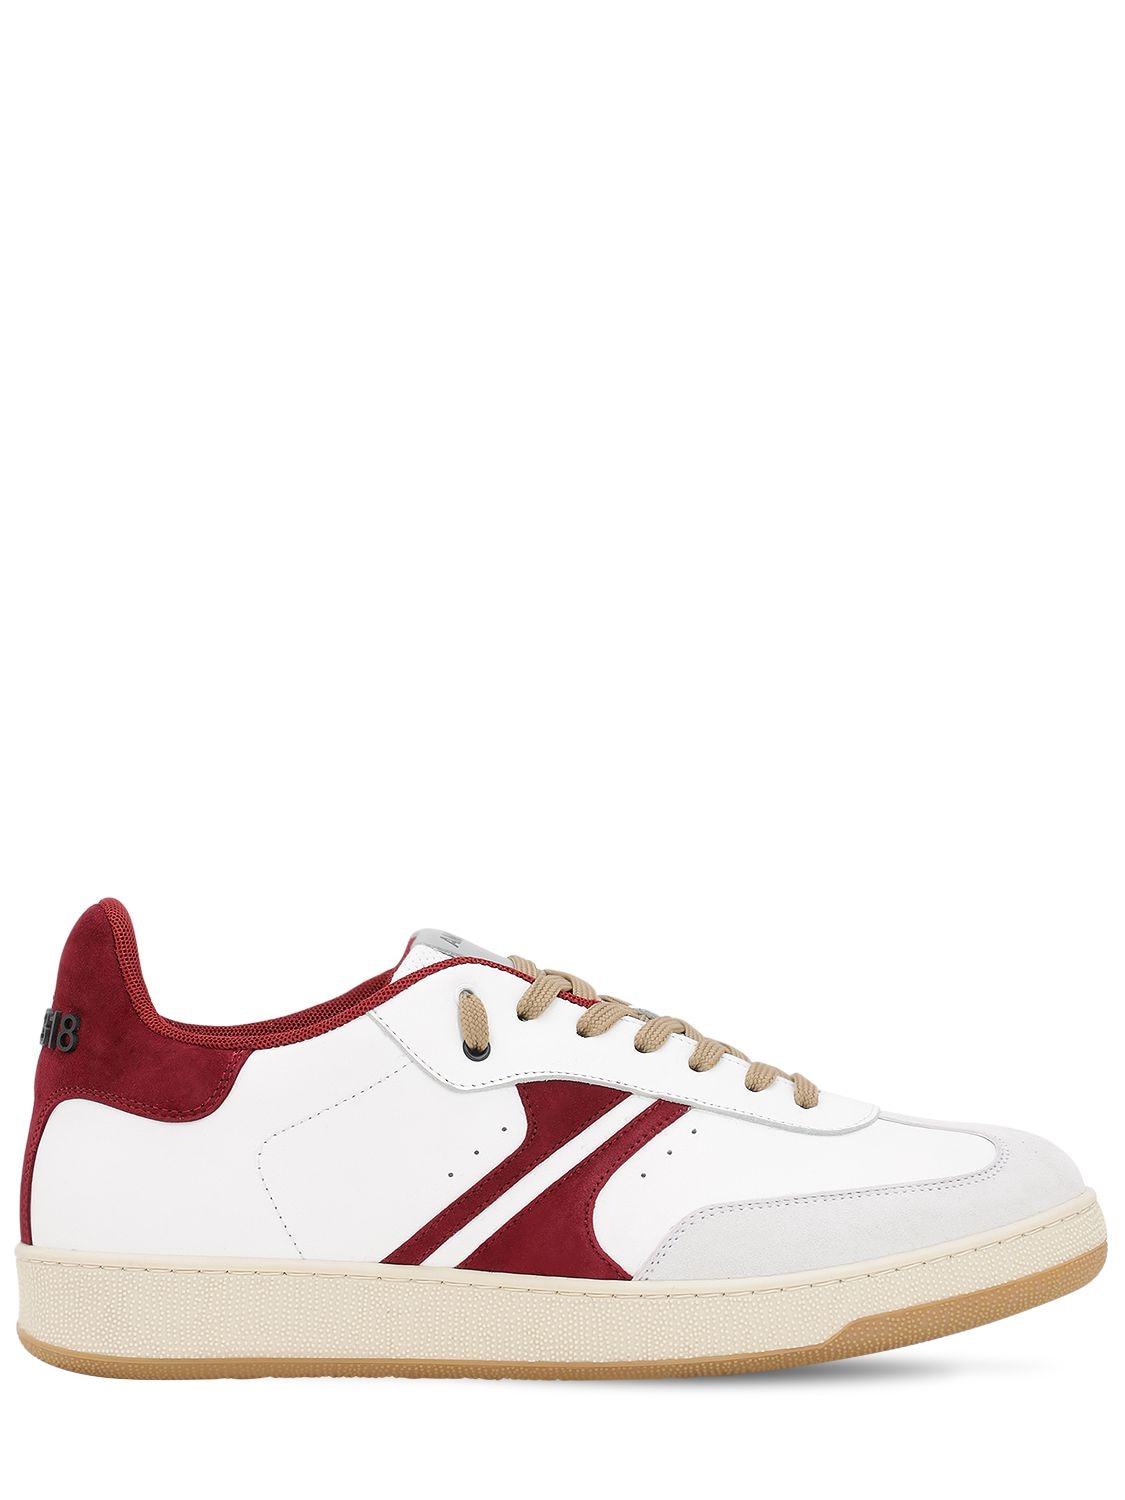 Am318 Arrow Sneakers In White,red